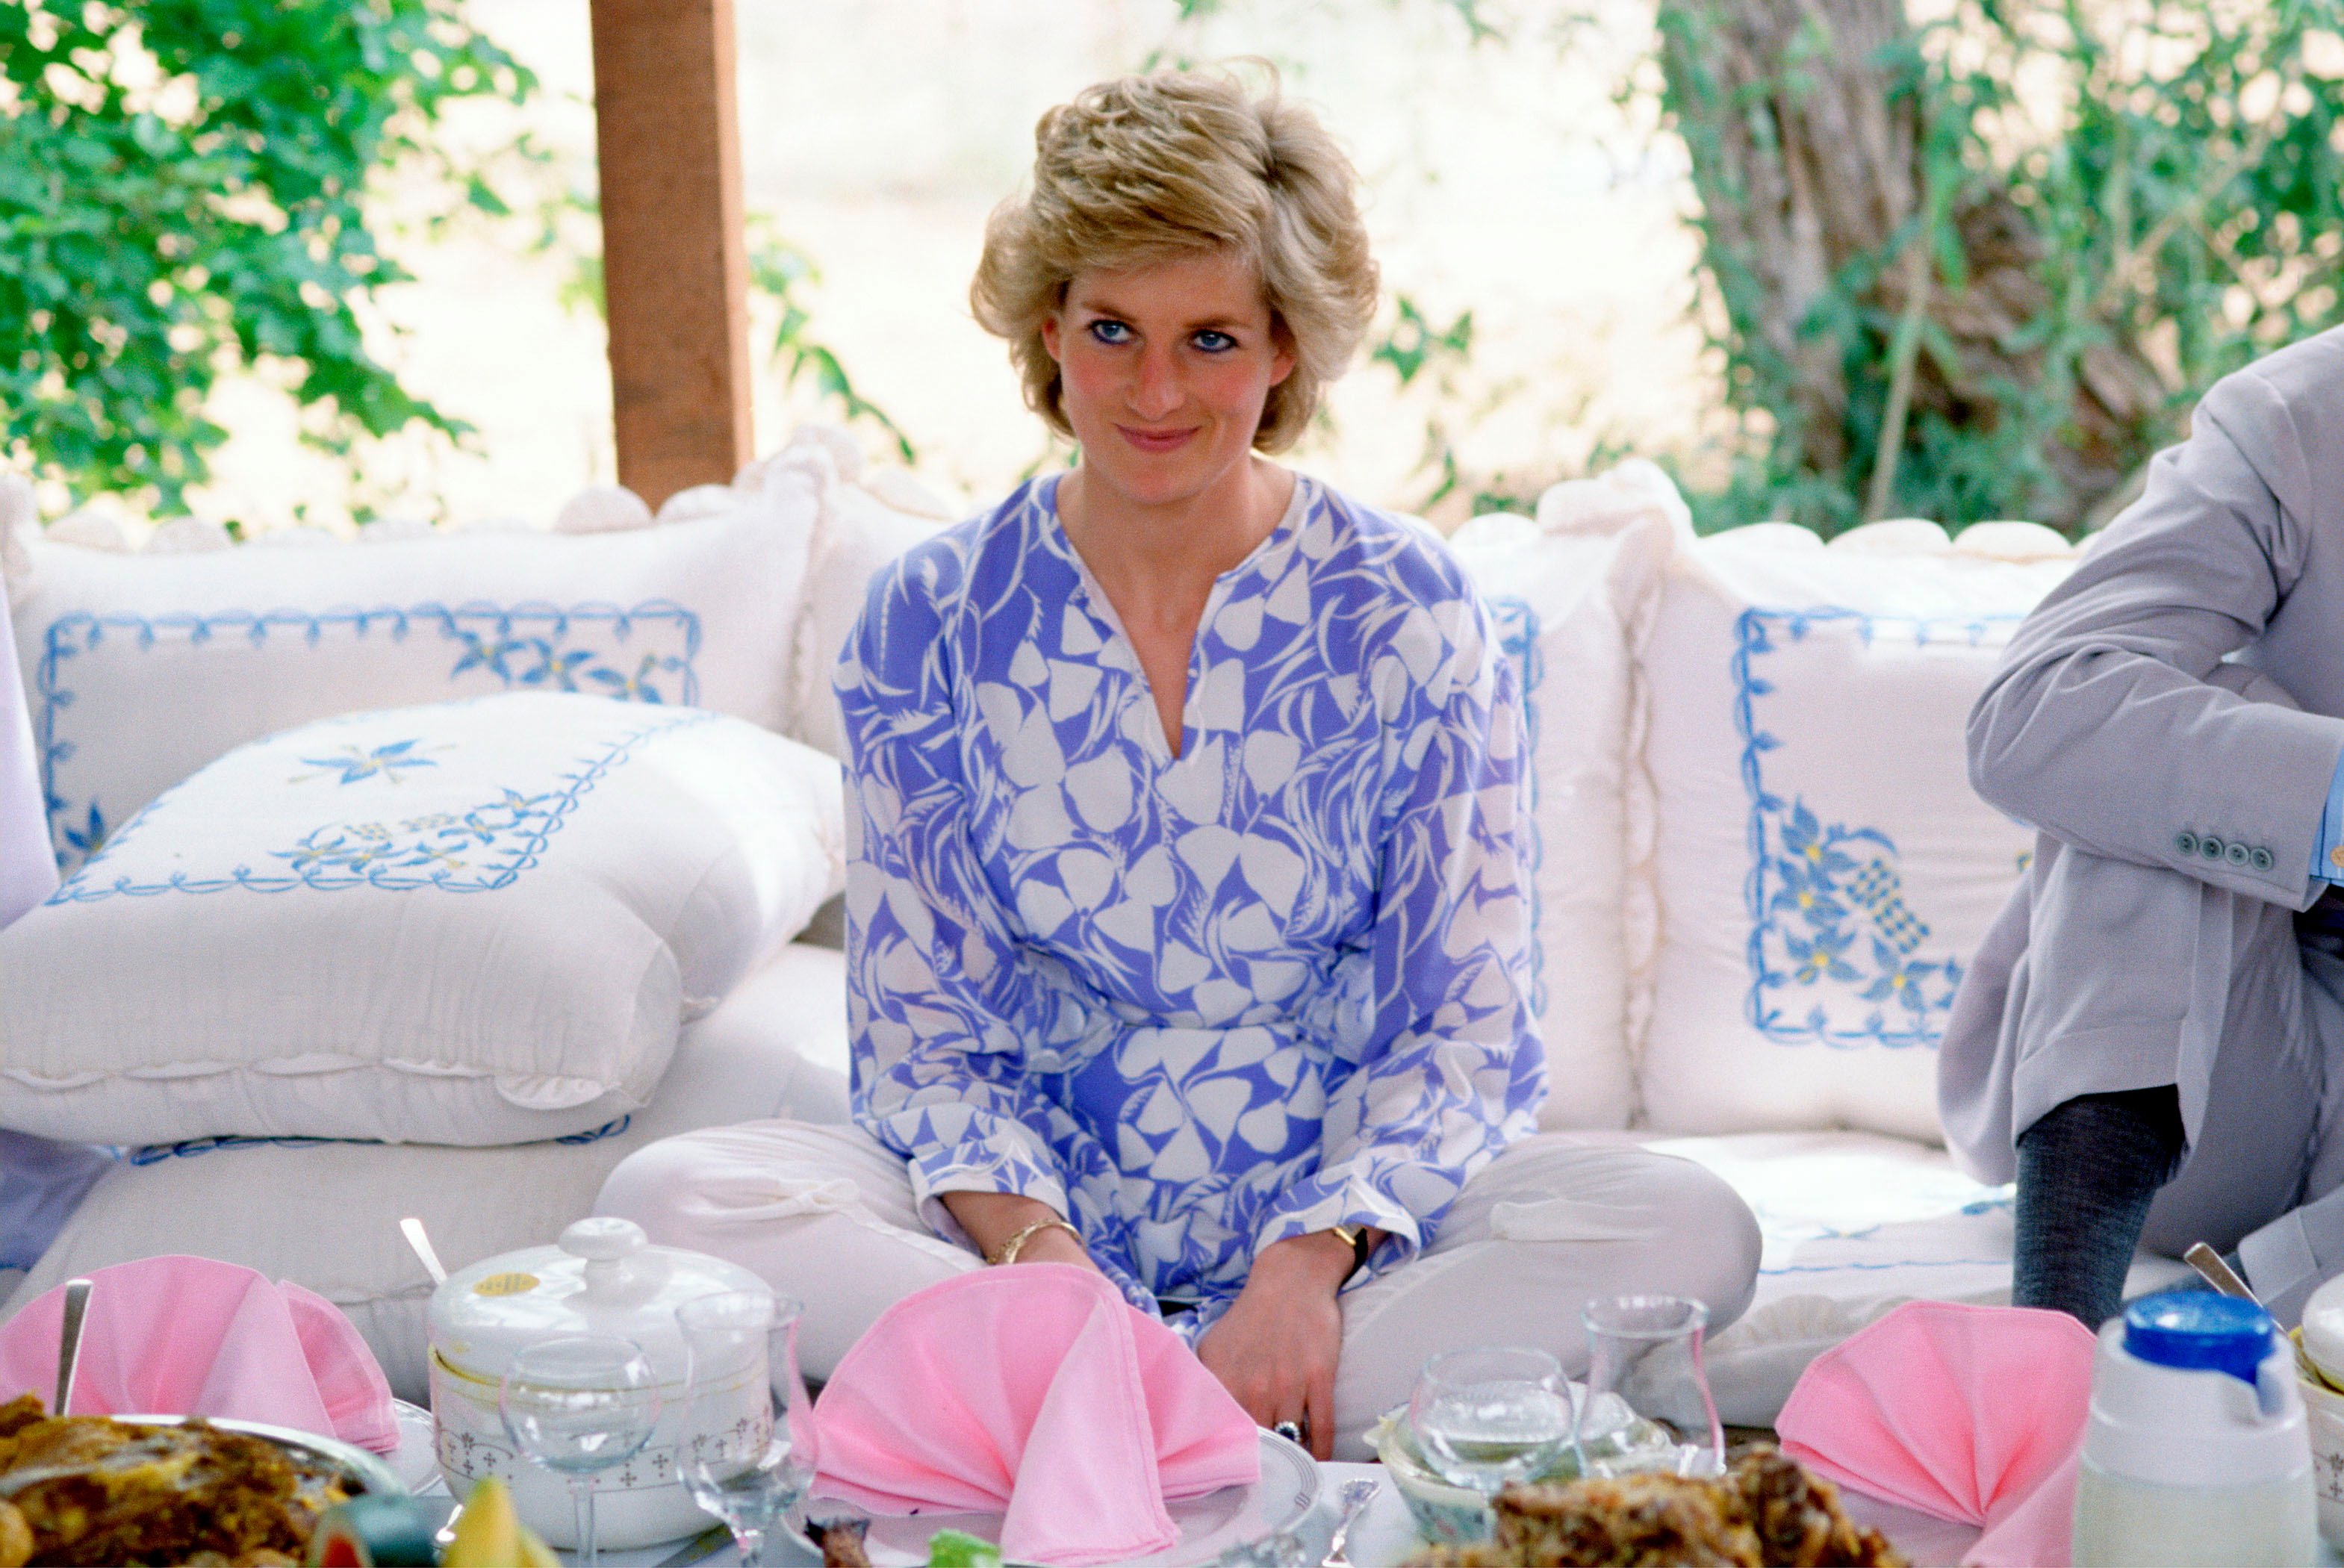 Princess Diana sitting cross-legged on cushions at a Bedouin-style picnic lunch